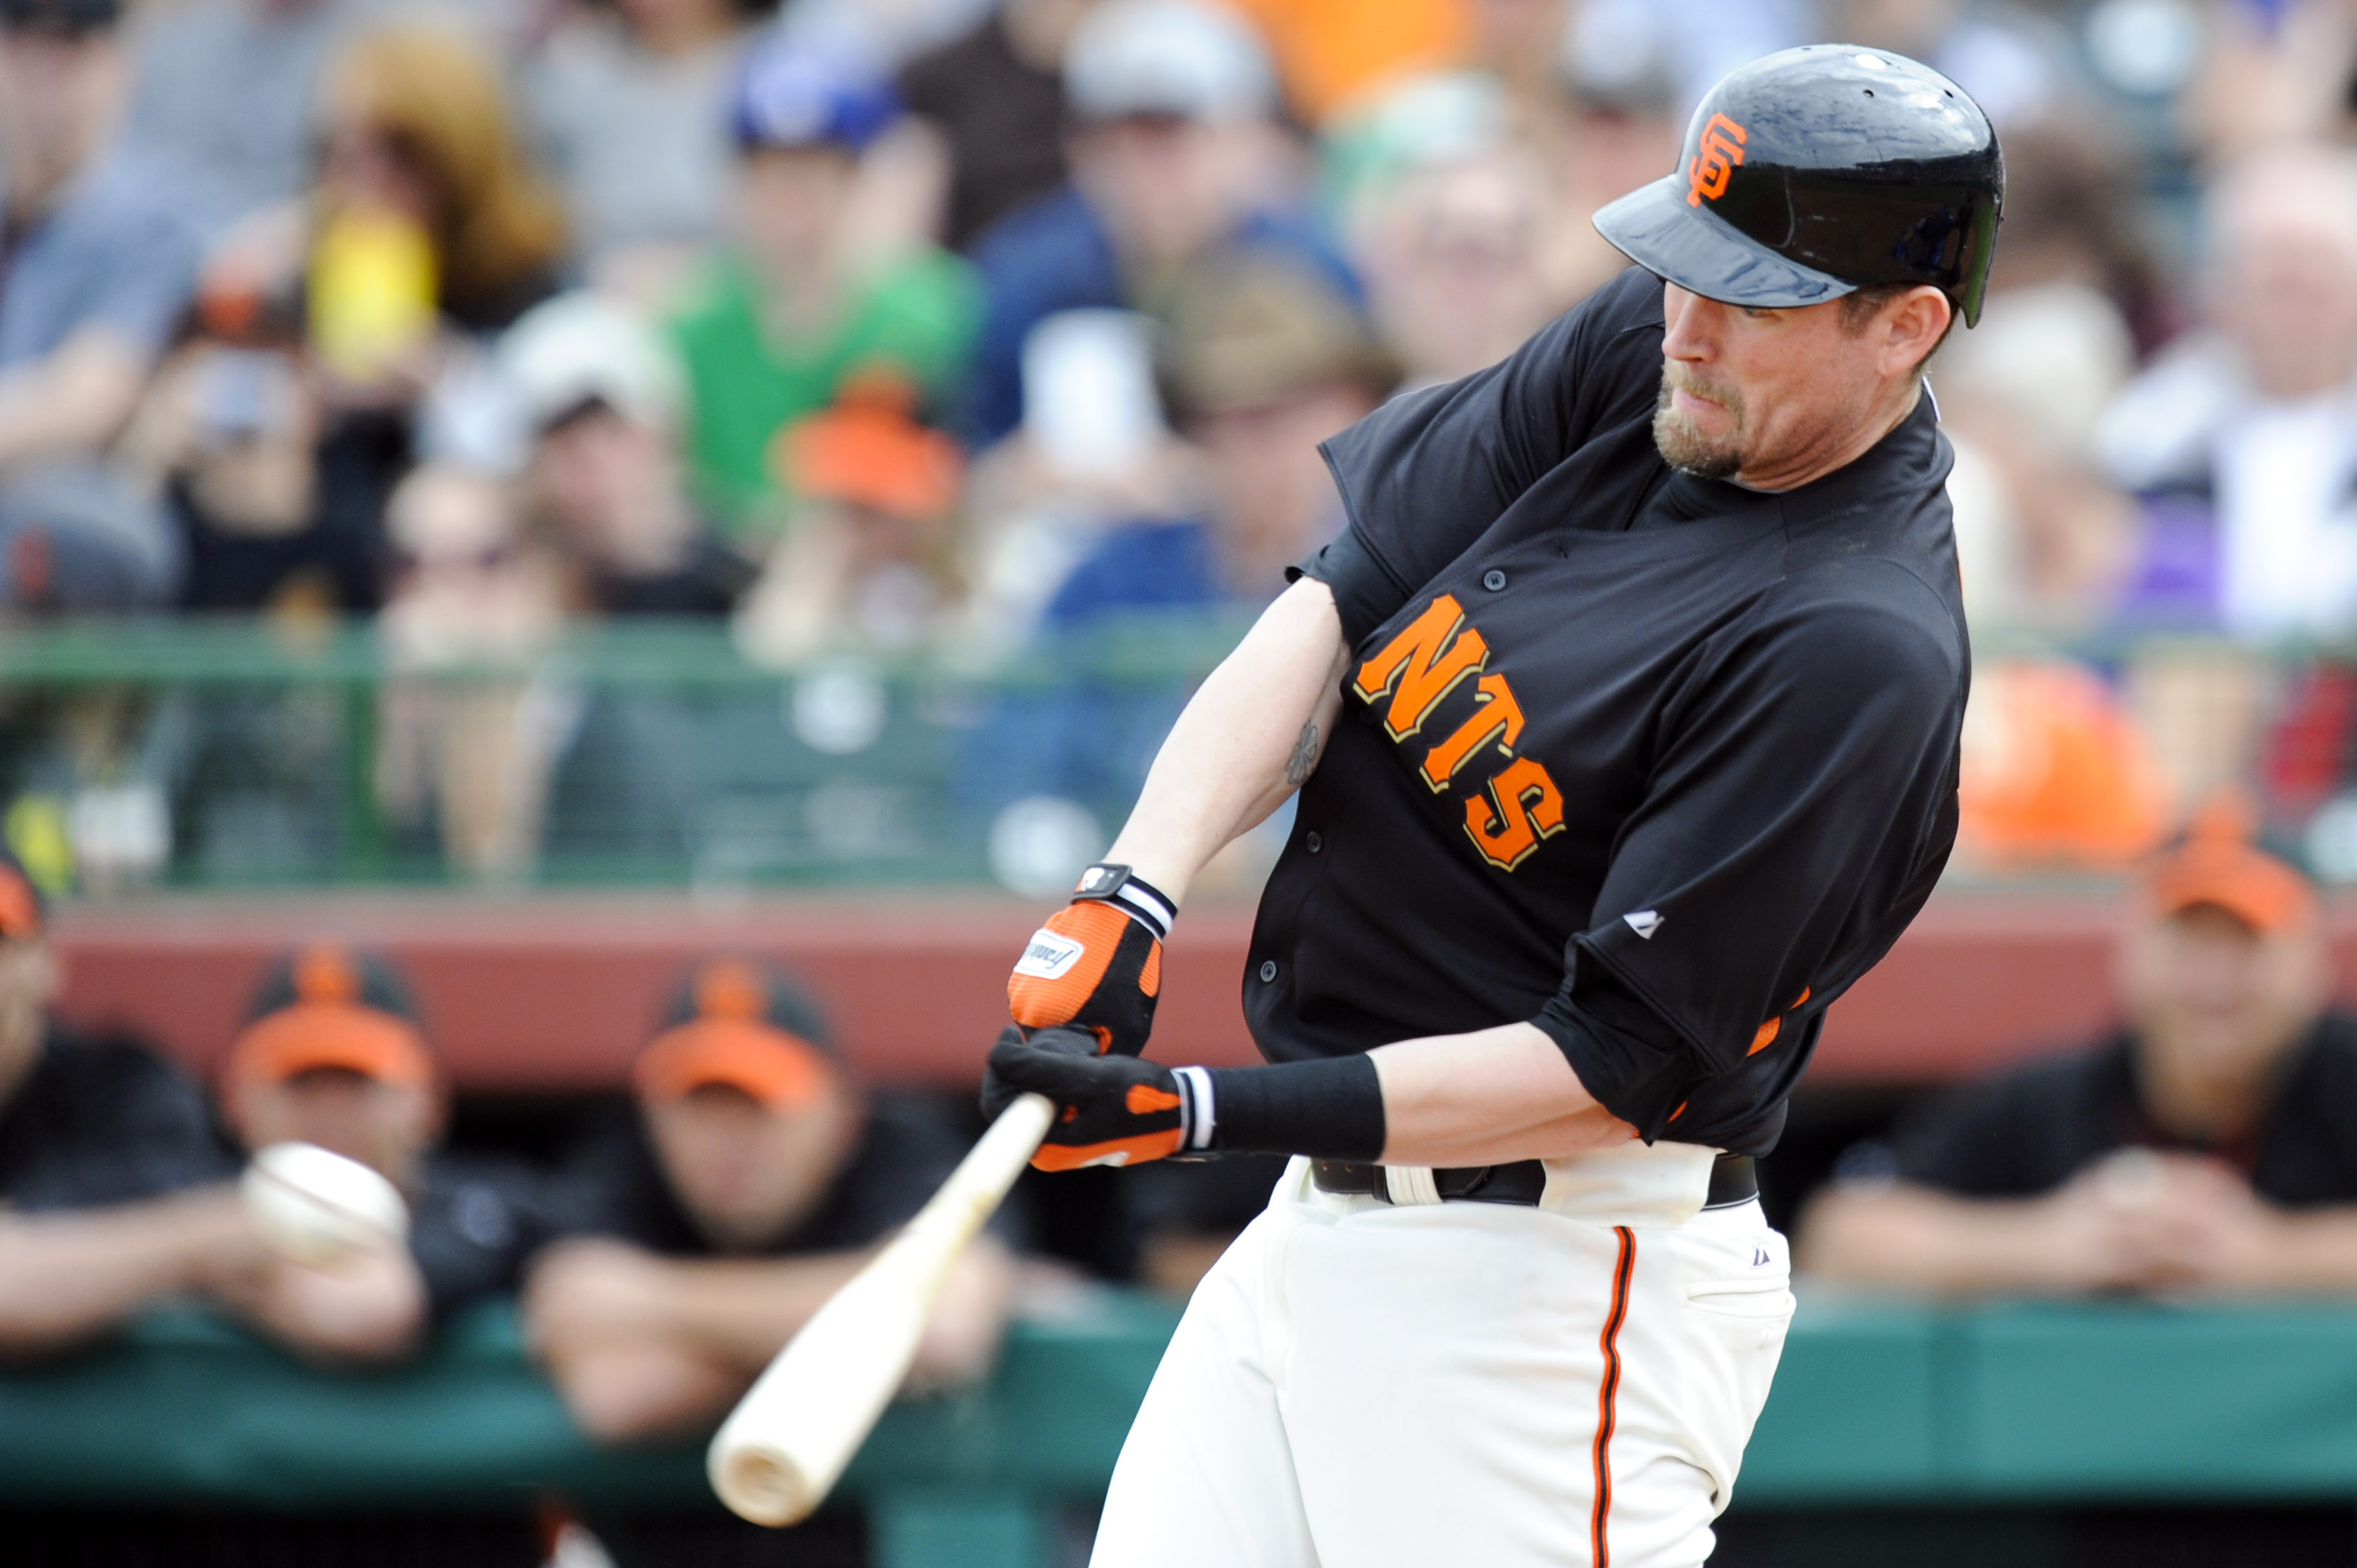 SCOTTSDALE, AZ - FEBRUARY 26: Aubrey Huff #17 of the San Francisco Giants bats during a spring training game at against the Los Angeles Dodgers at Scottsdale Stadium on February 26, 2011 in Scottsdale, Arizona. (Photo by Rob Tringali/Getty Images)